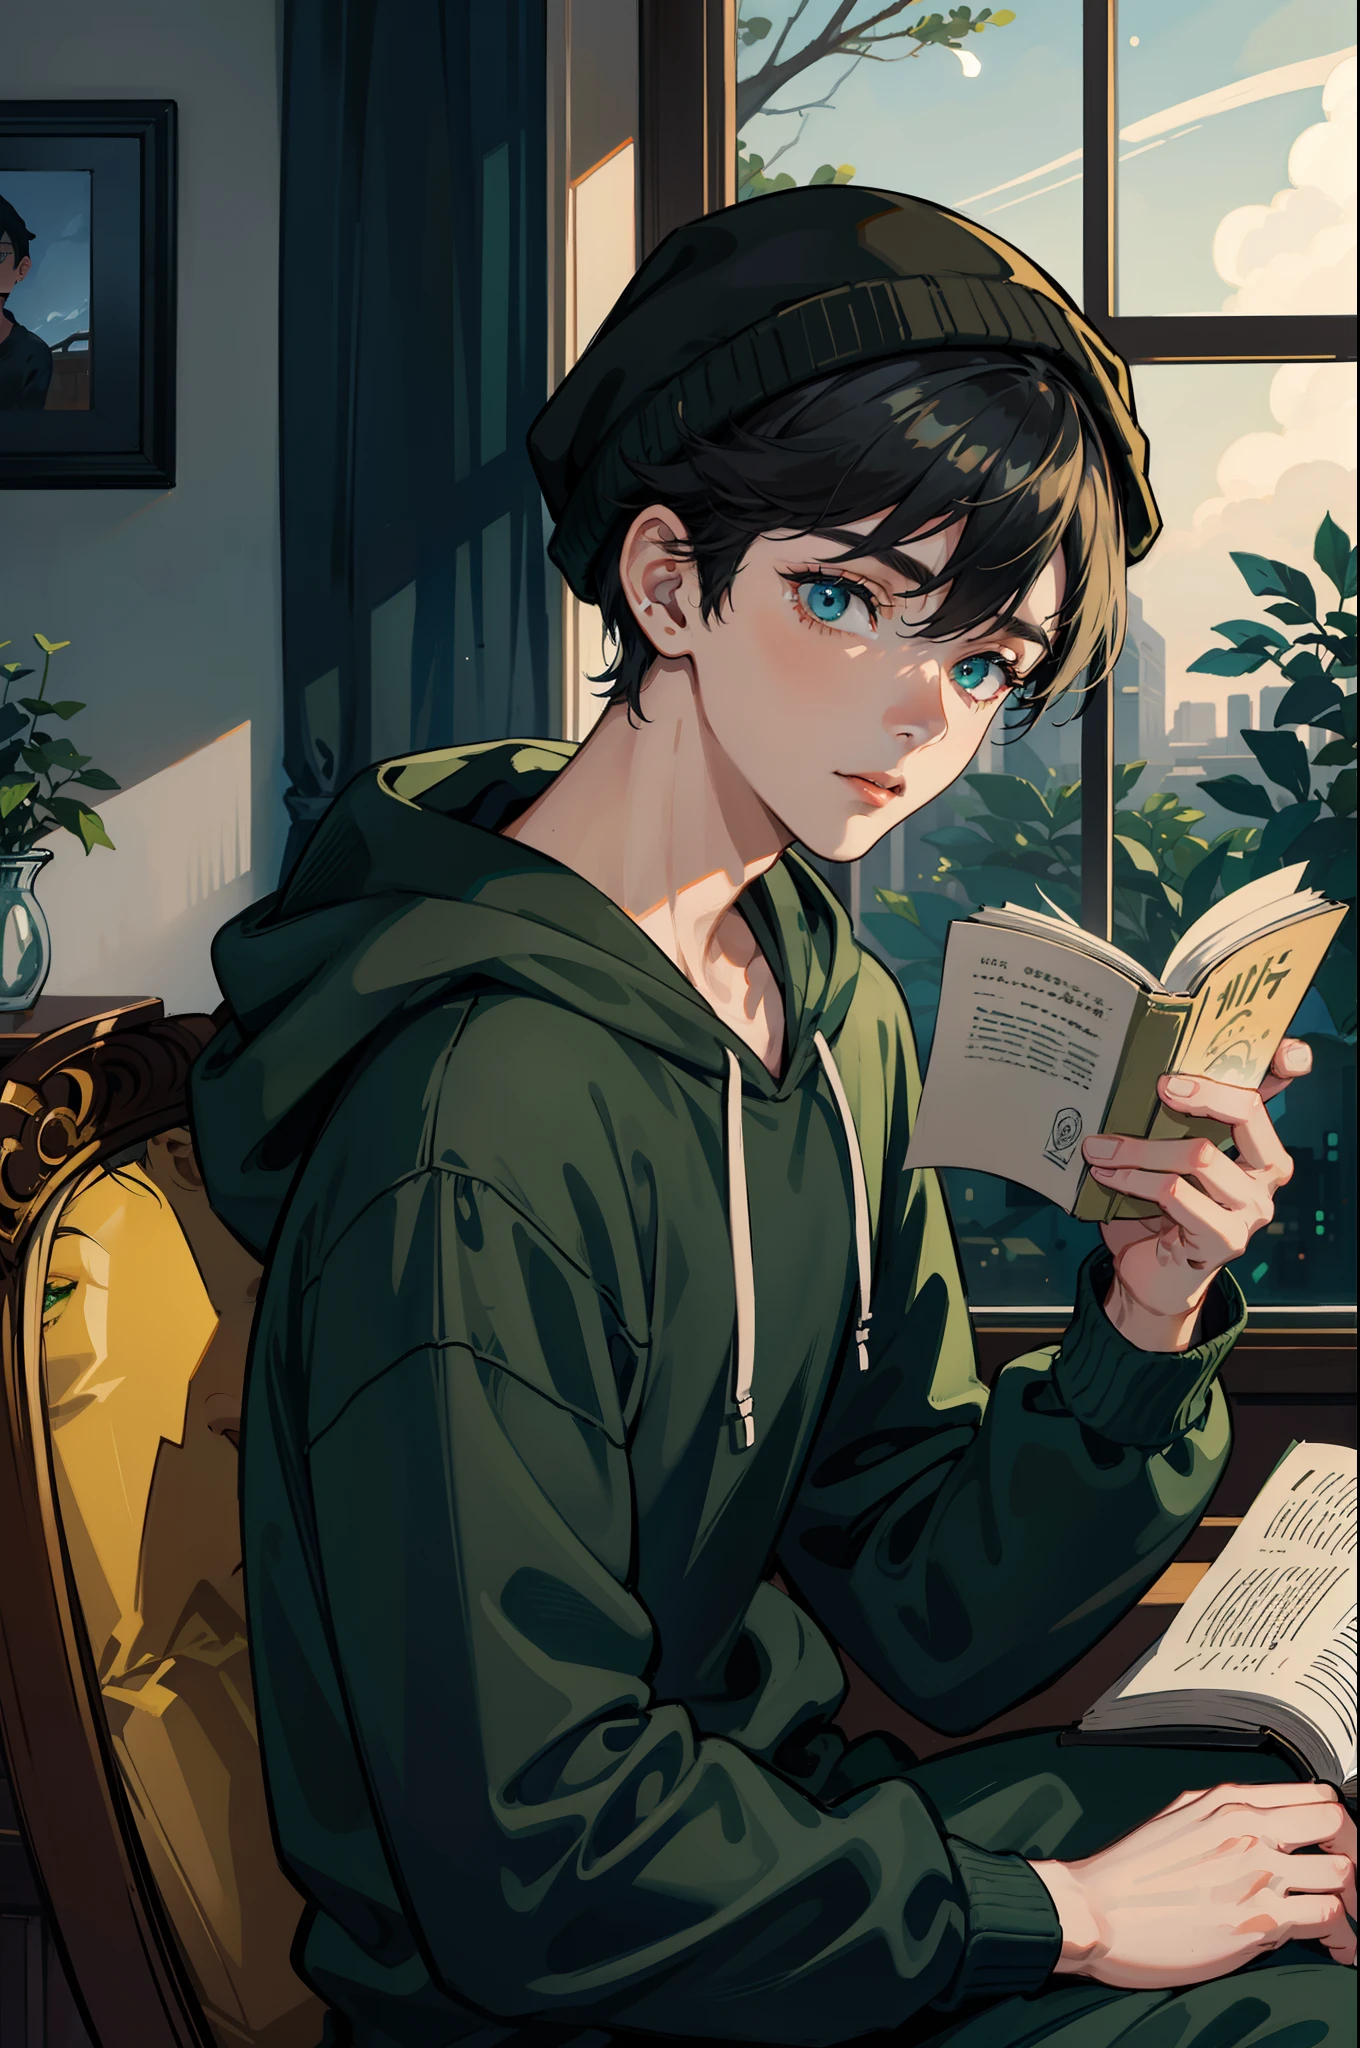 1 Boy, Perfect Face, Perfect eyes, Master Piece, highly detailed, Sitting at desk reading a book next to window, Moonlight highlights everything, wearing black hoodie, Green Beanie, black hair, Joggers black,